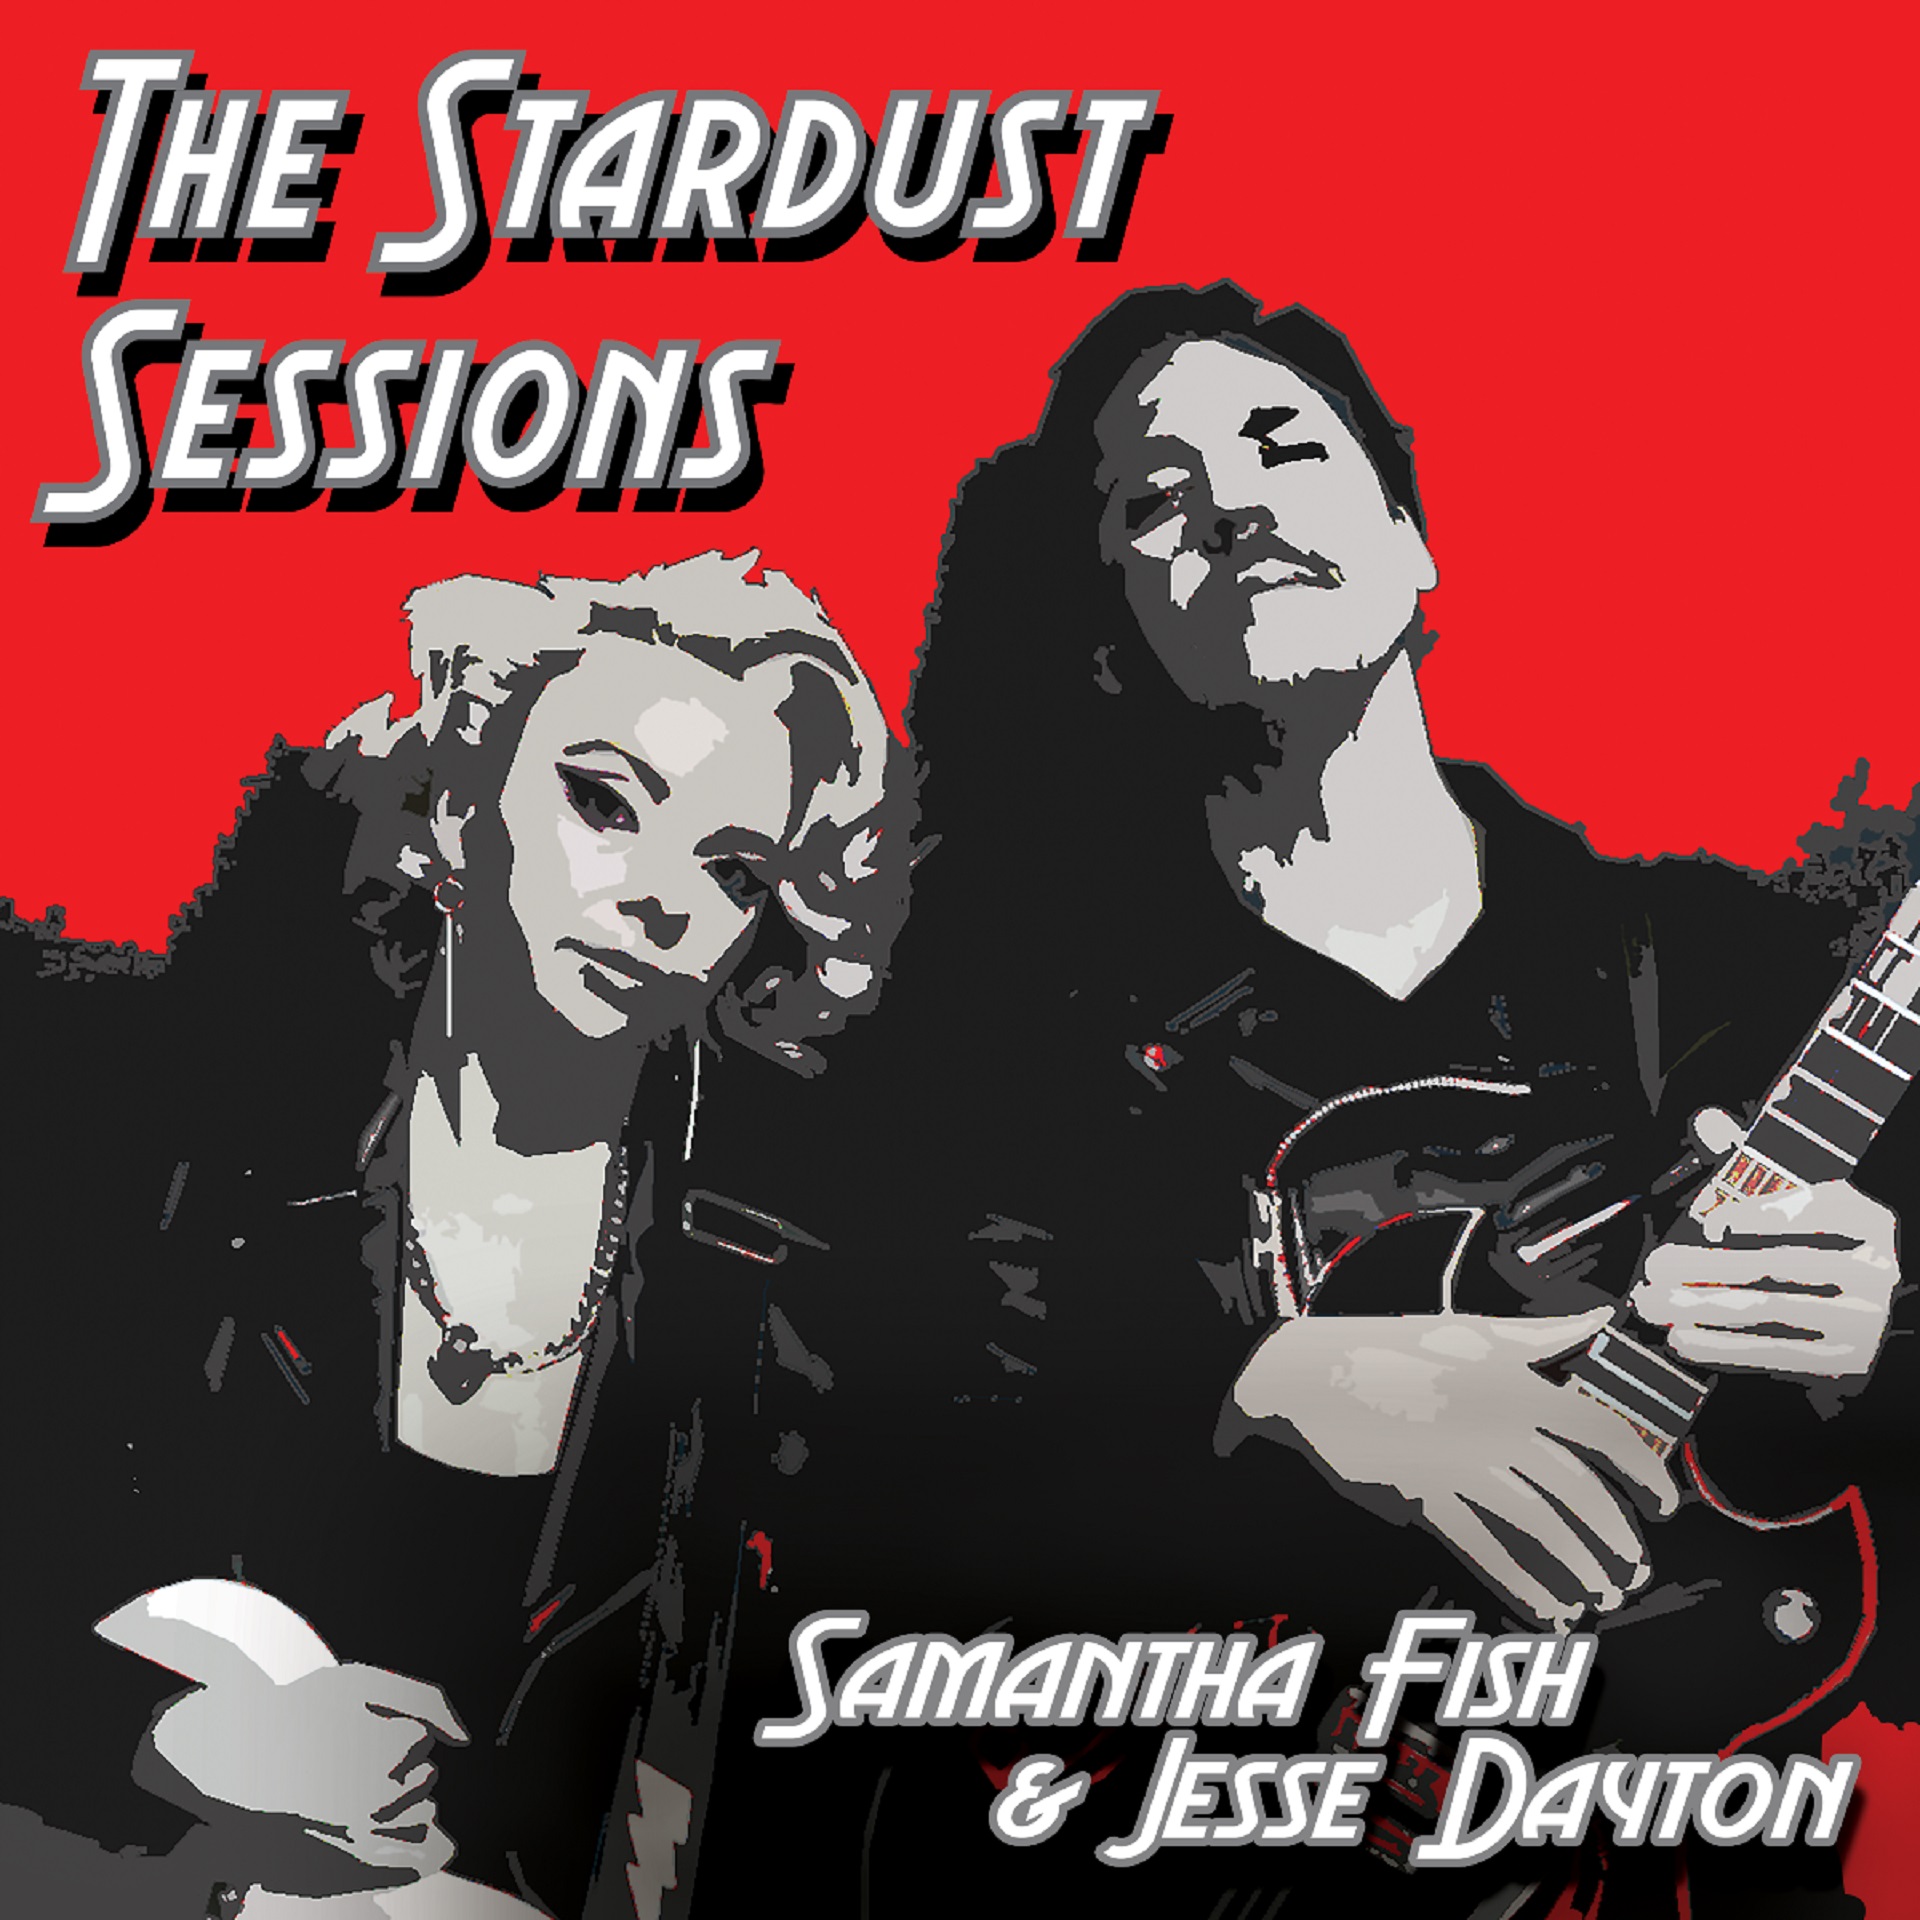 Samantha Fish & Jesse Dayton Release 'The Stardust Sessions' EP & Embark on Natl Tour